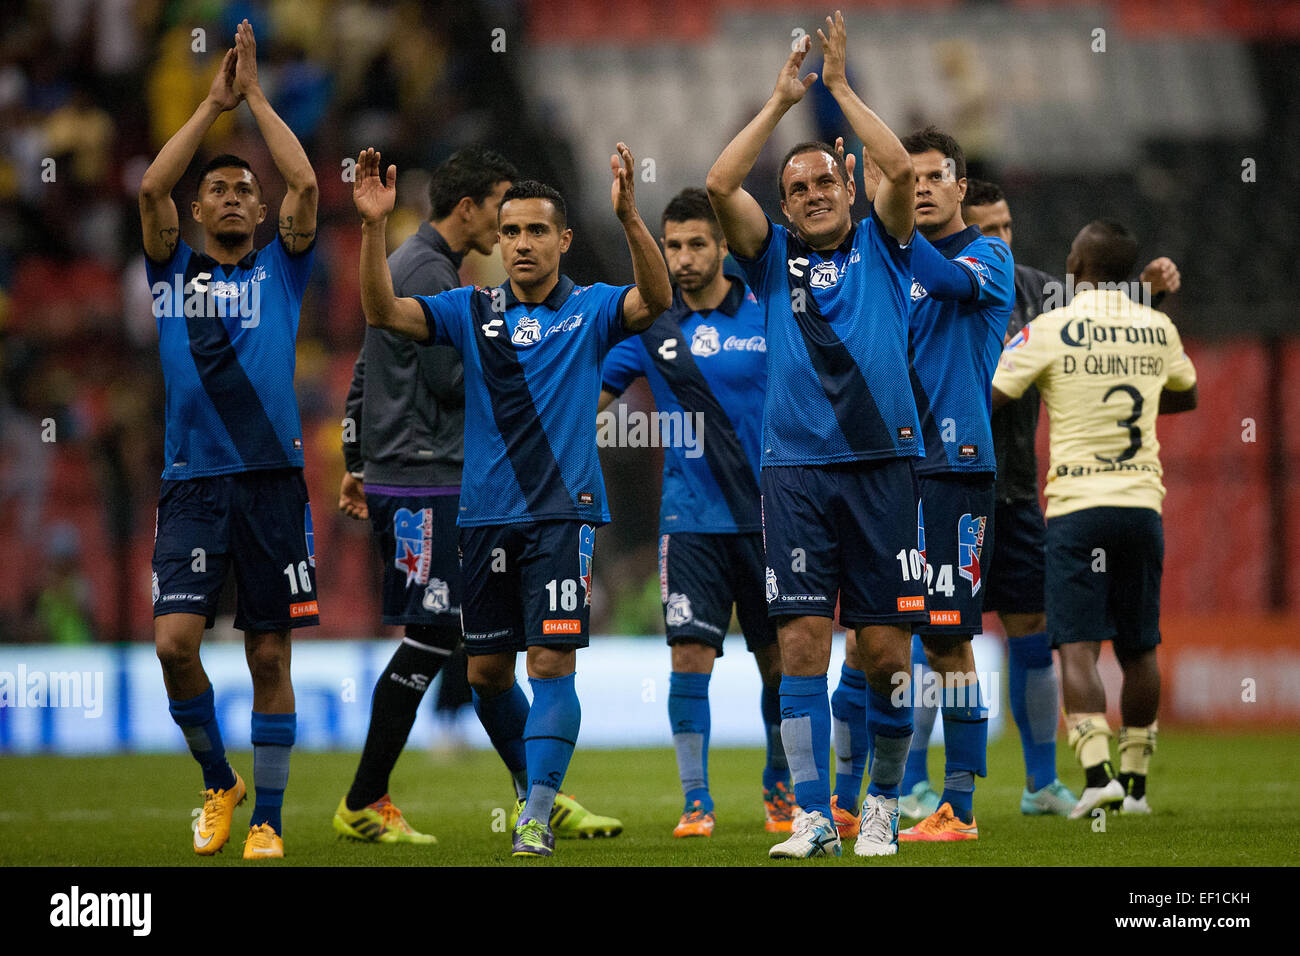 Mexico City. 24th Jan, 2015. Puebla's players react after the match against America at the Closing Tournament 2015 of the MX League at the Azteca Stadium in Mexico City on Jan. 24, 2015. © Pedro Mera/Xinhua/Alamy Live News Stock Photo